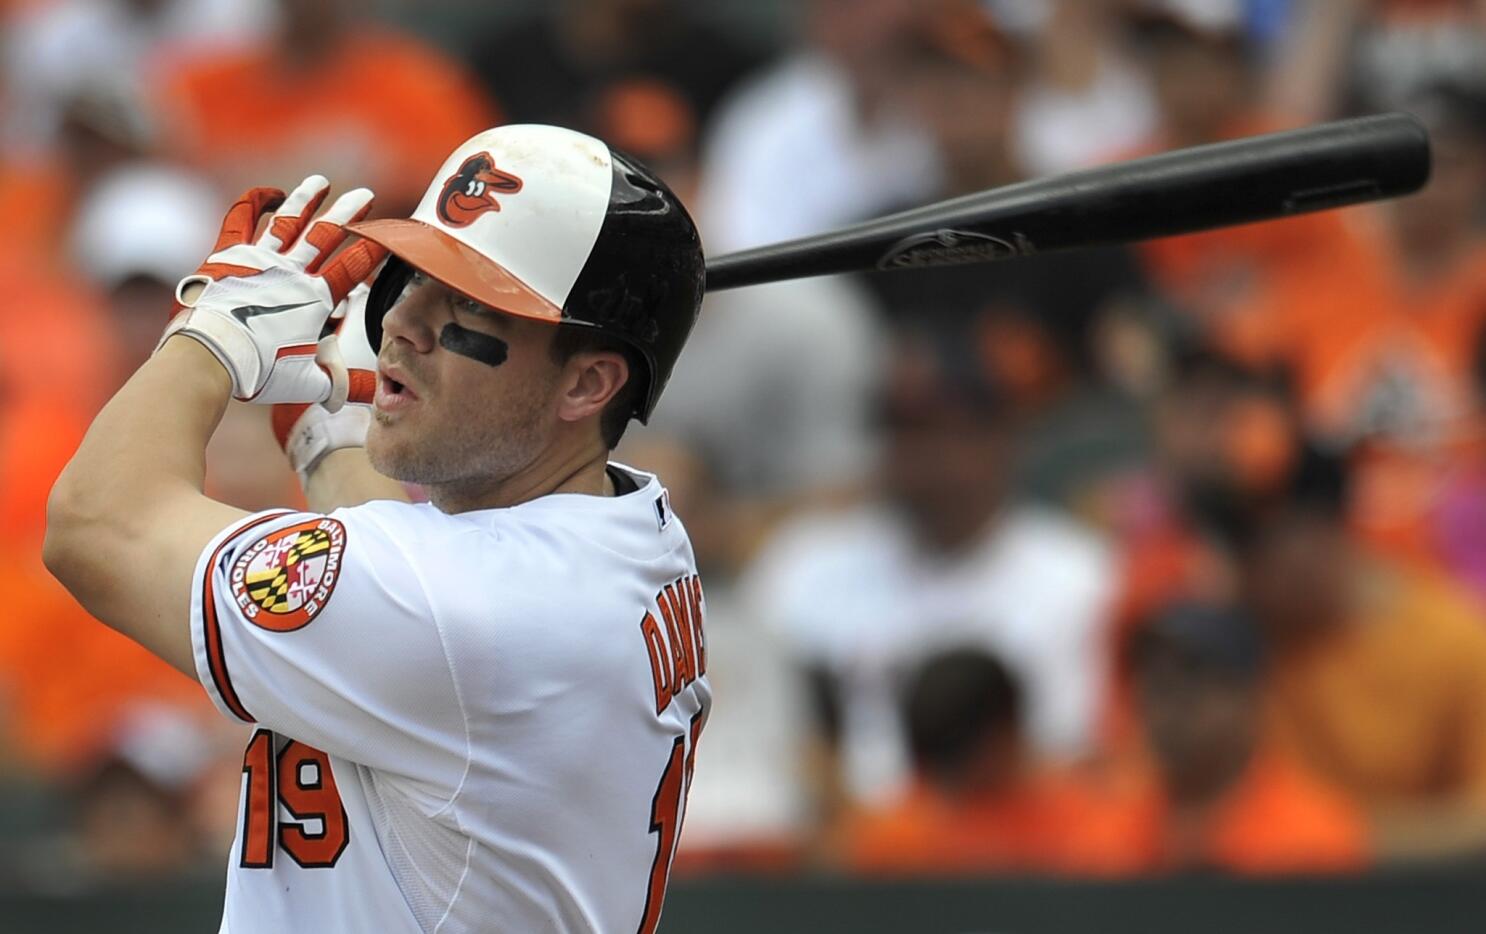 Orioles Send Five Players to All-Star Game, the Most Since 1972